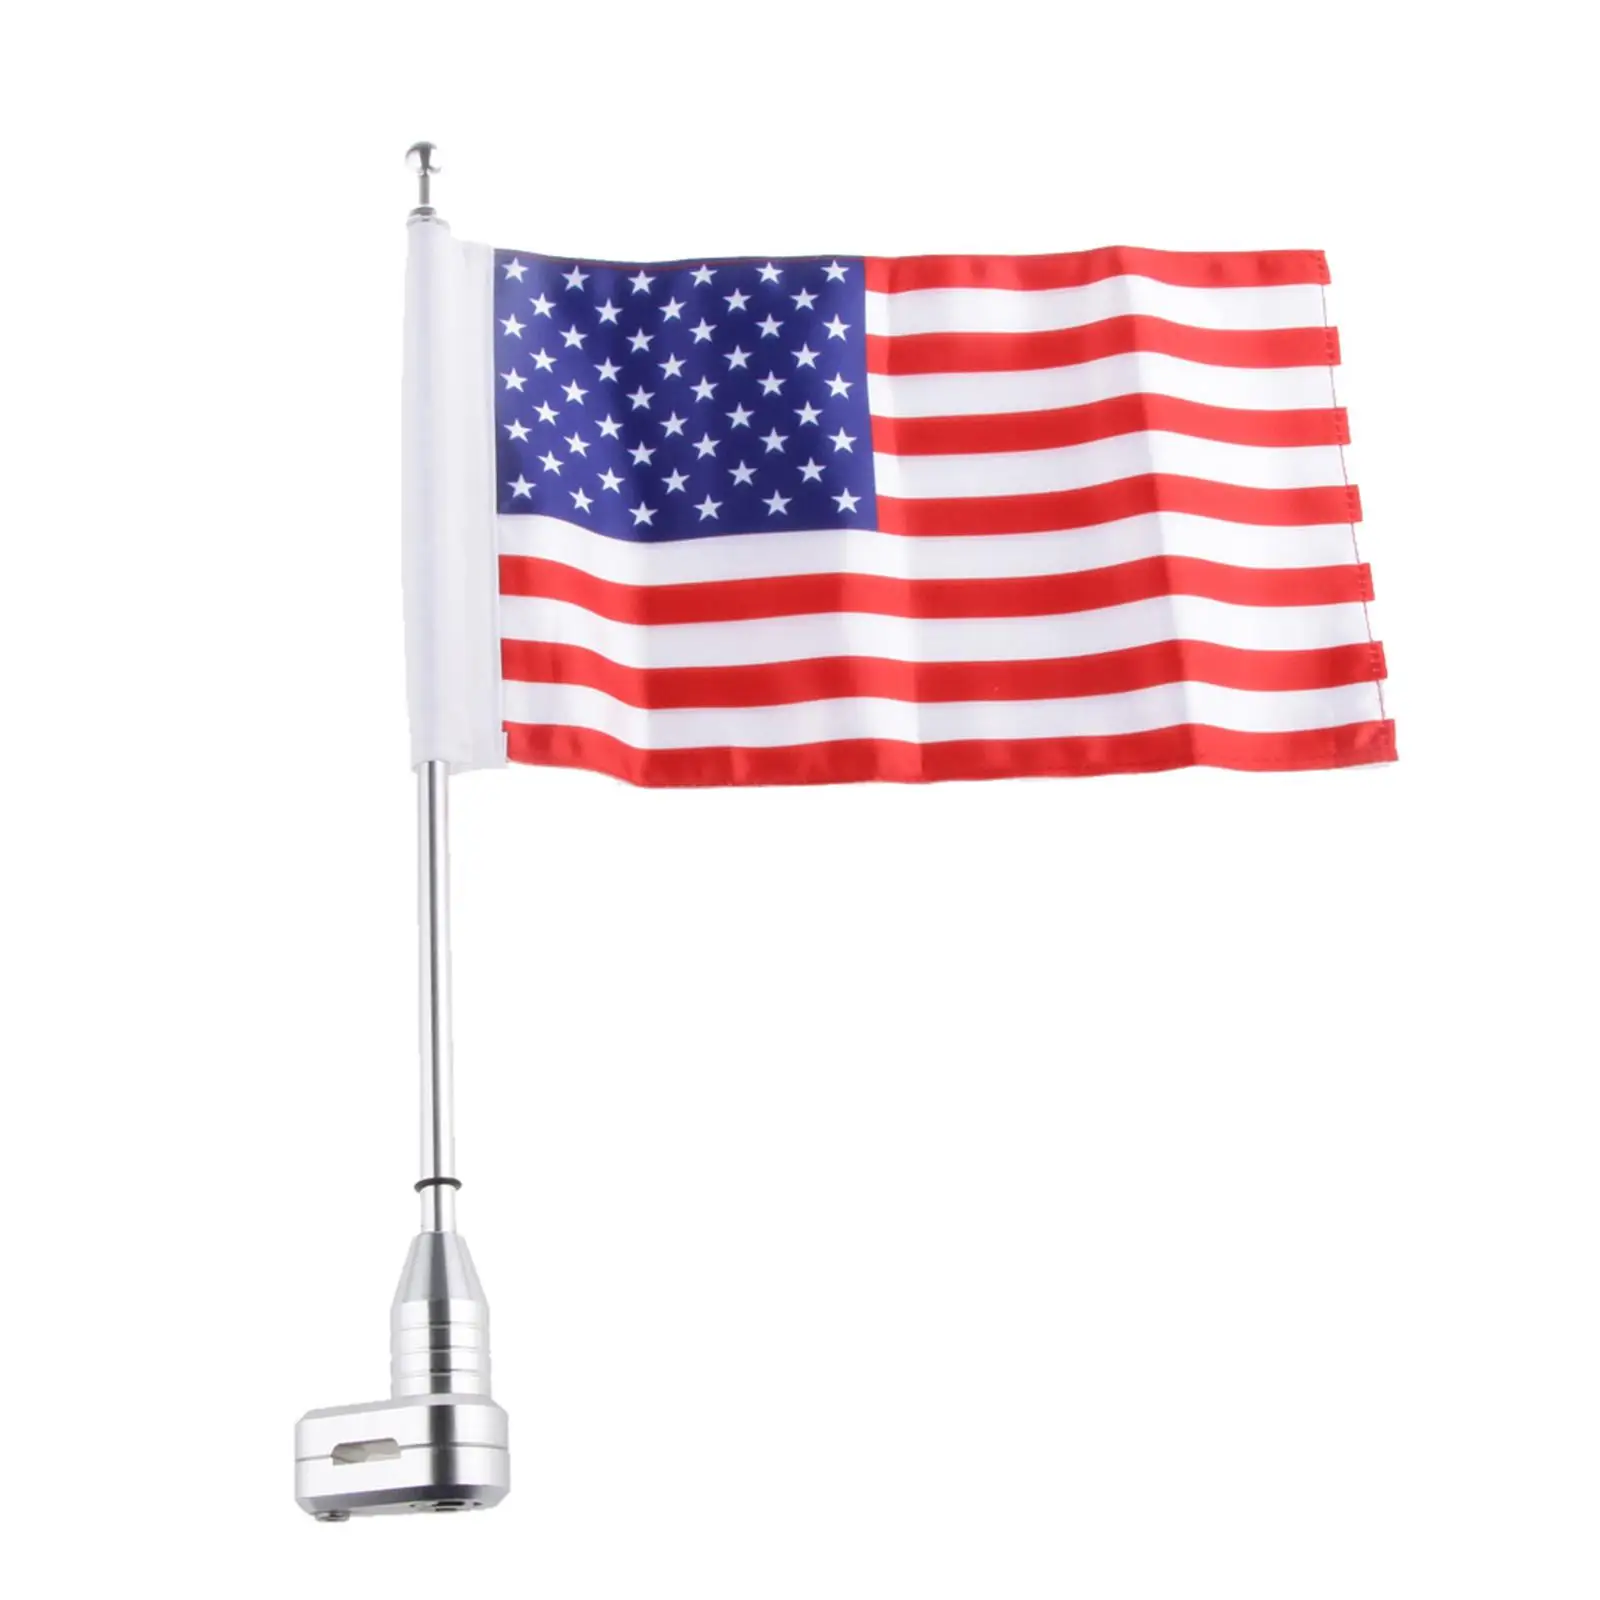 Motorcycle Rear Side Flagpole Mount Holder And  Flag USA  6 Inch 16 X 27 Cm Fit for XL883 Luggage Rack